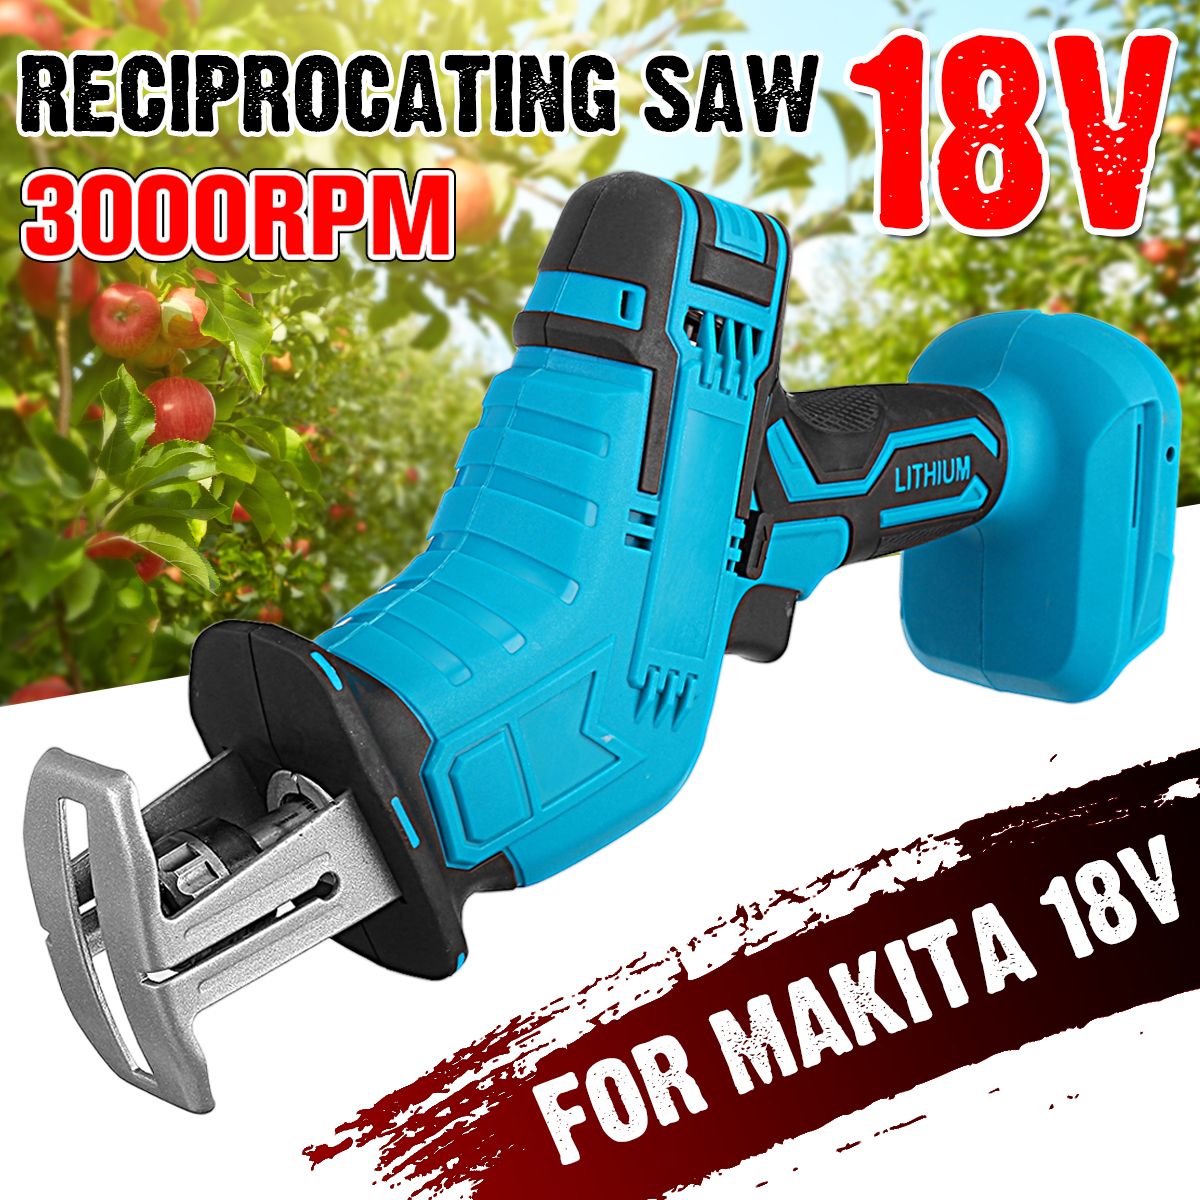 10mm-Cordless-Reciprocating-Saw-3000rpm-Saw-Replacement-Variable-Speed-For-Makita-18V-Battery-1673434